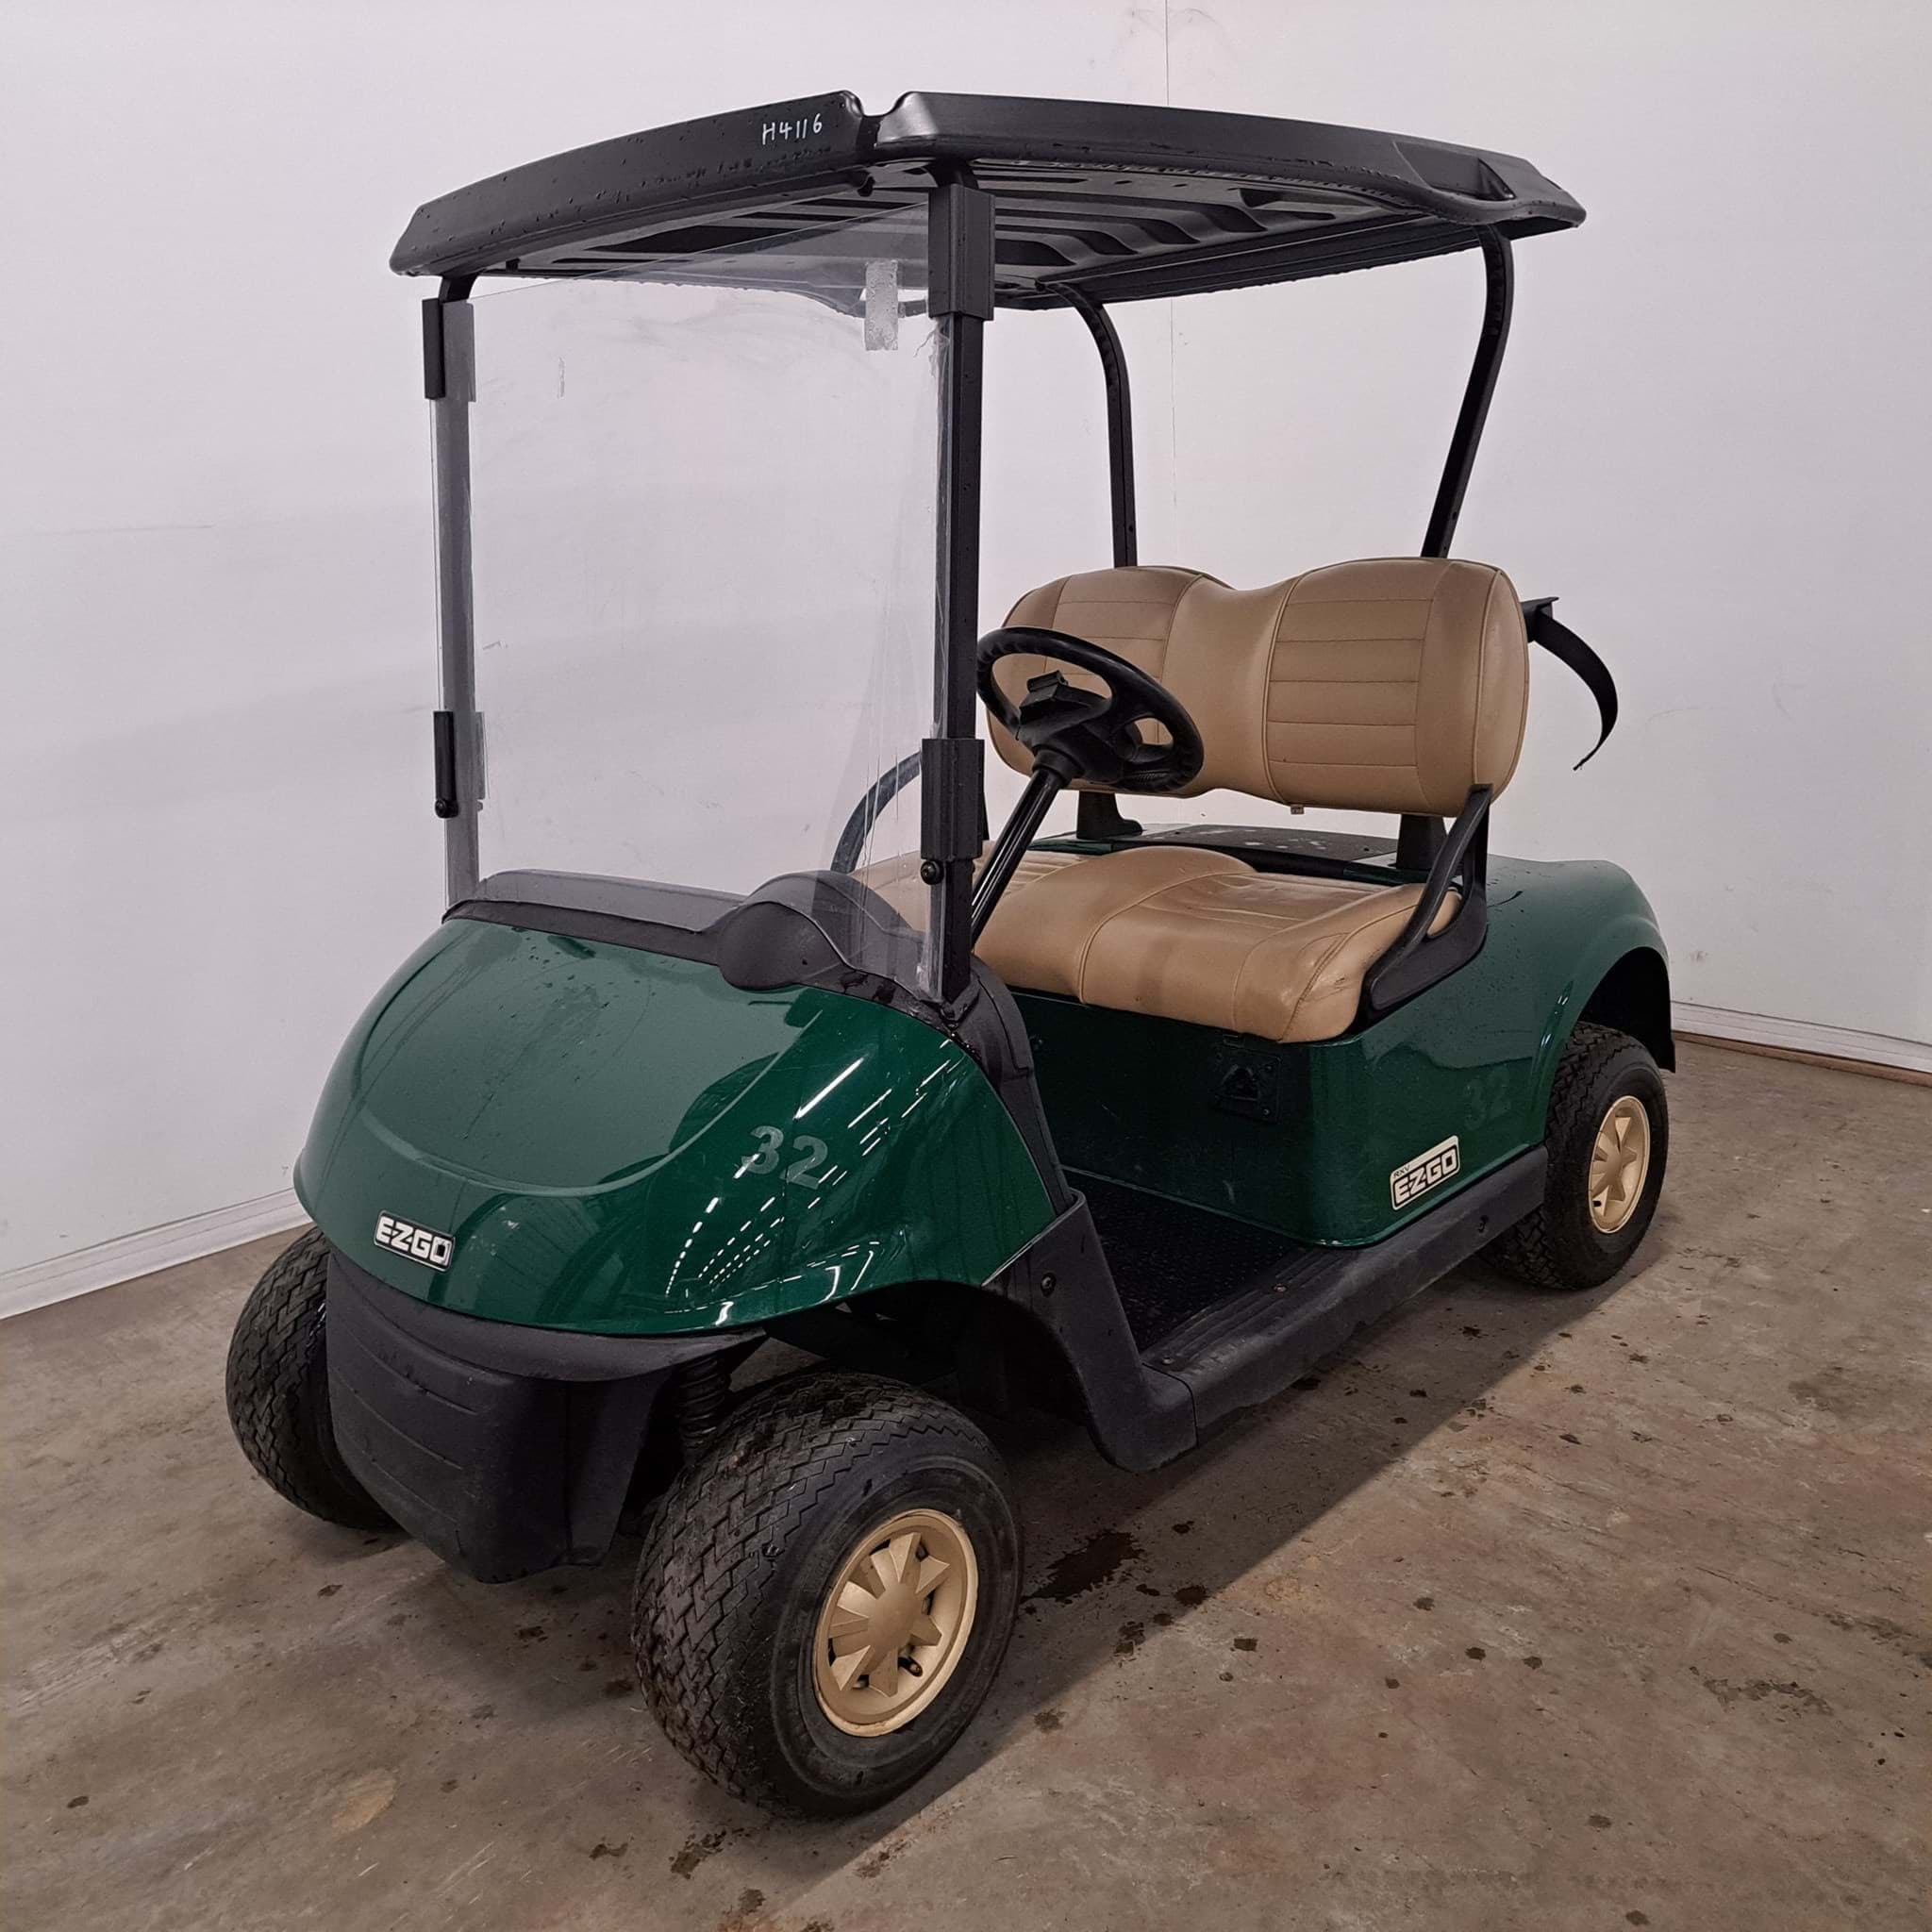 Picture of Trade - 2019 - Electric lithium - EZGO - RXV - 2 seater - Green